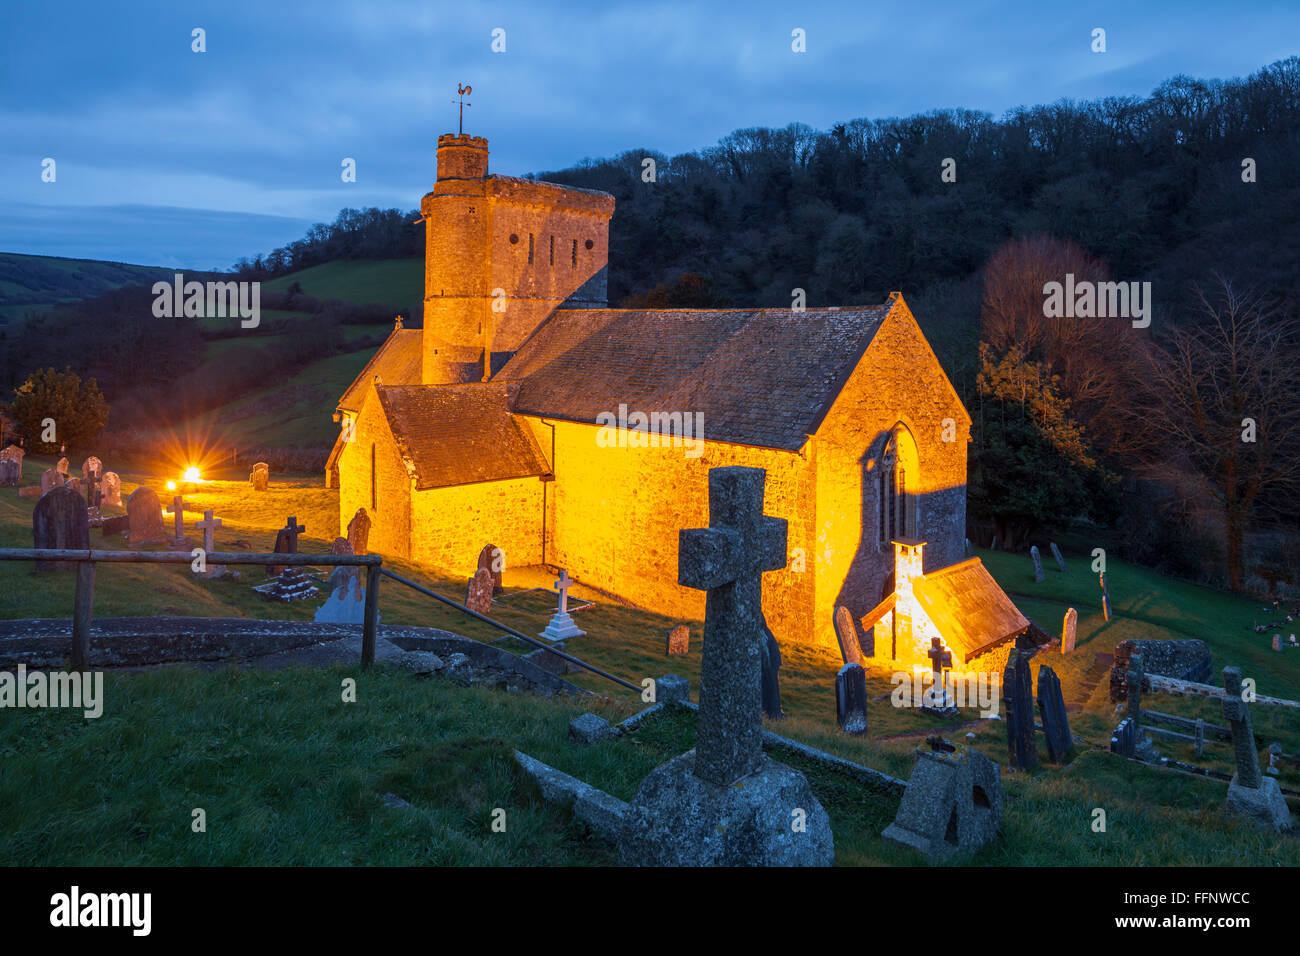 Winter evening at St Winifred's church in Branscombe, Devon, England. East Devon Area of Outstanding Natural Beauty. Stock Photo